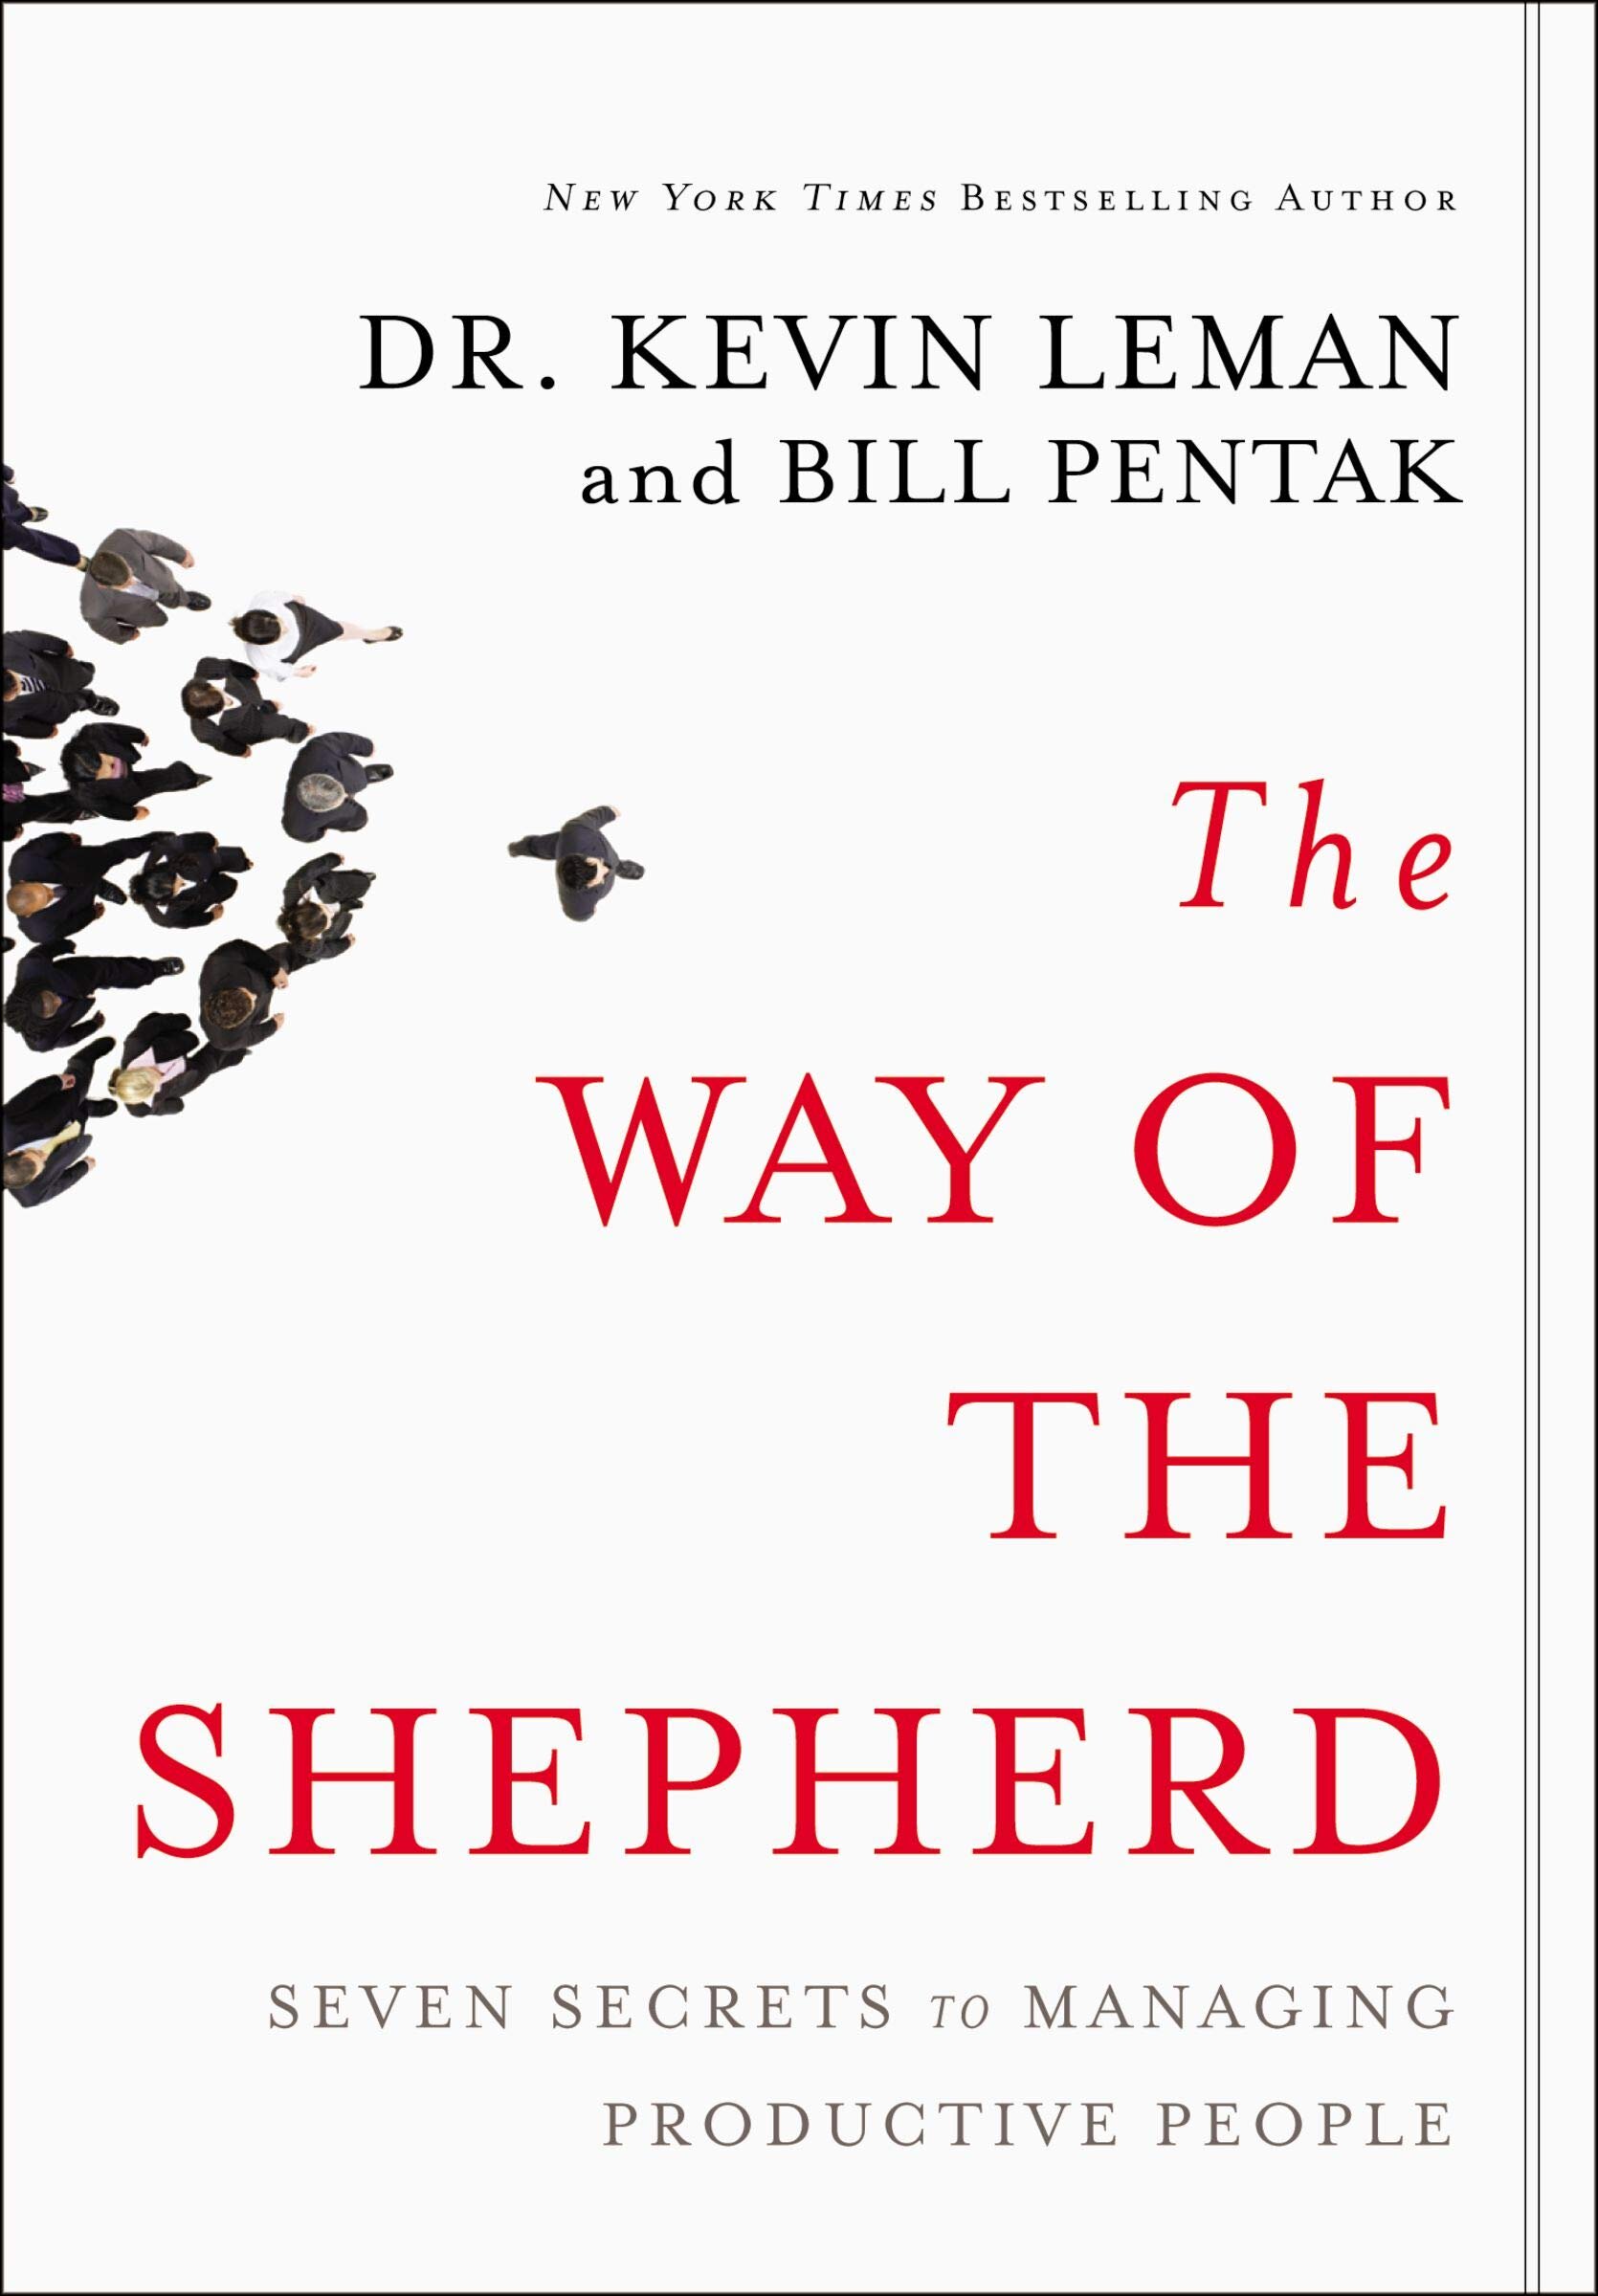 The Way of the Shepherd: Seven Secrets to Managing Productive People - Kevin Leman, William Pentak